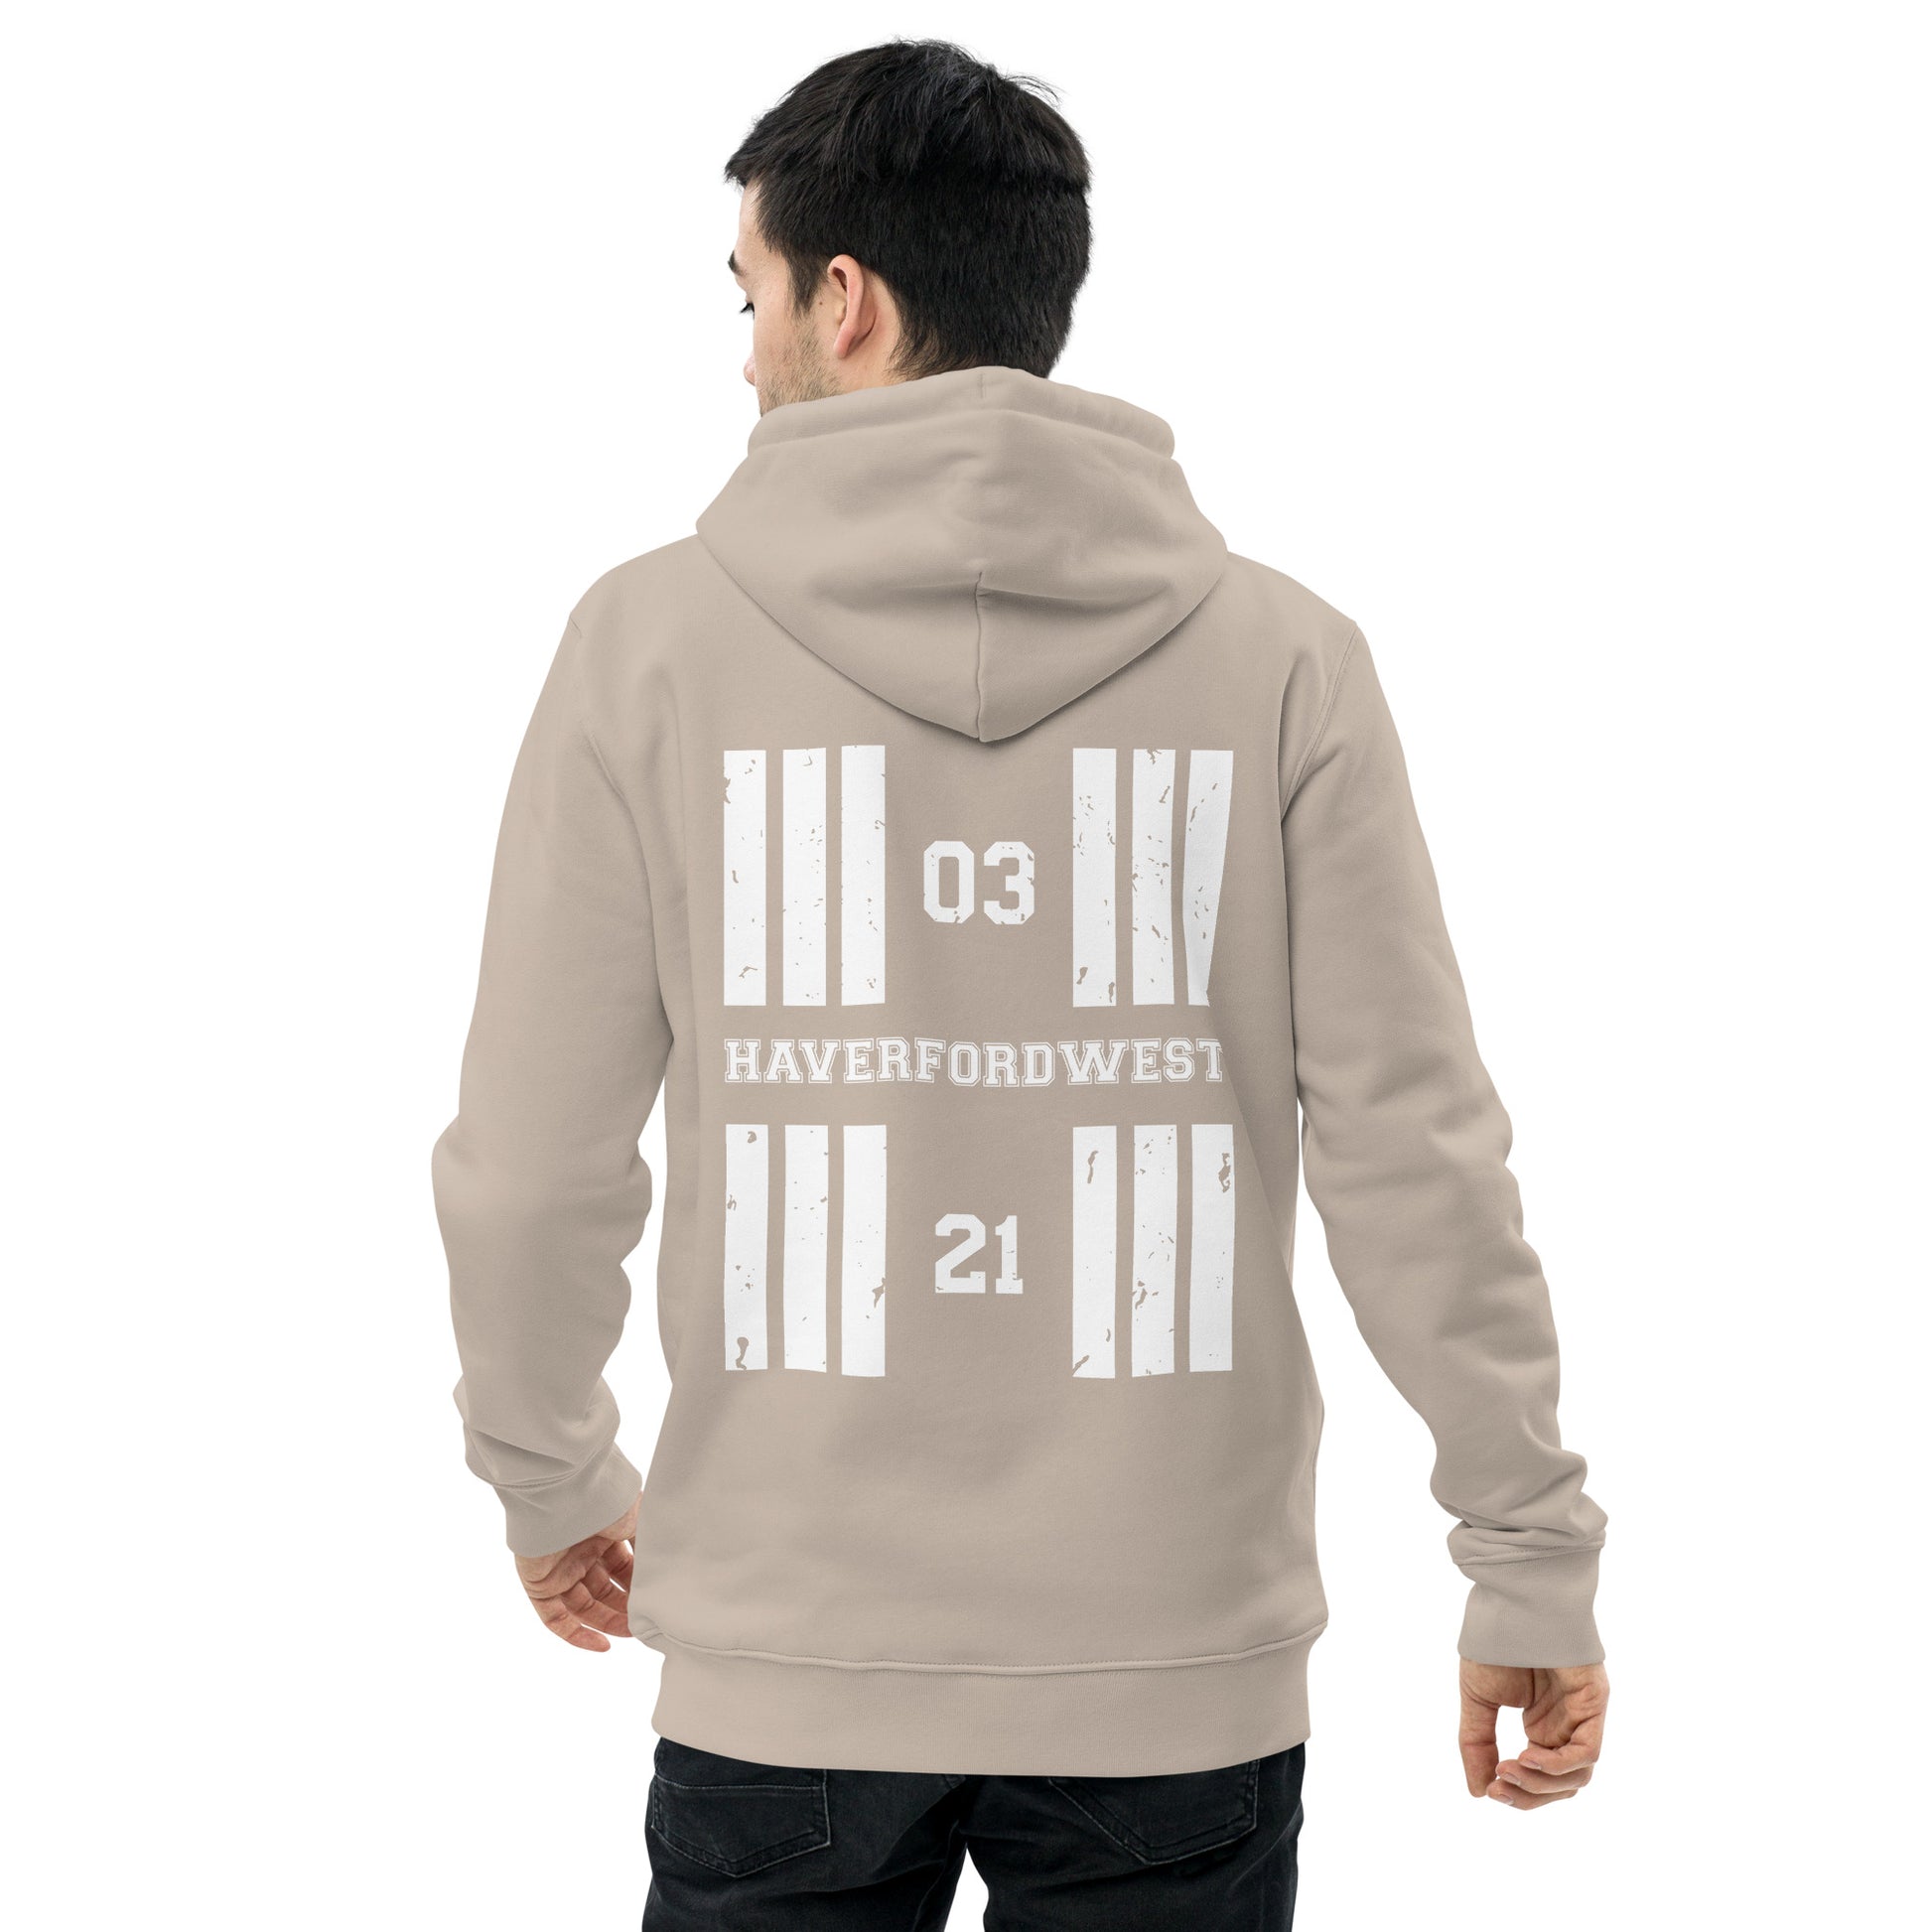 Coloured in a sandy gray called desert dust the Haverfordwest Airport Designator heavyweight hoodie features a discreet collegiate print on the front with a bold print featuring the airport's name and designator, framed by stylised distressed threshold markings on the back.